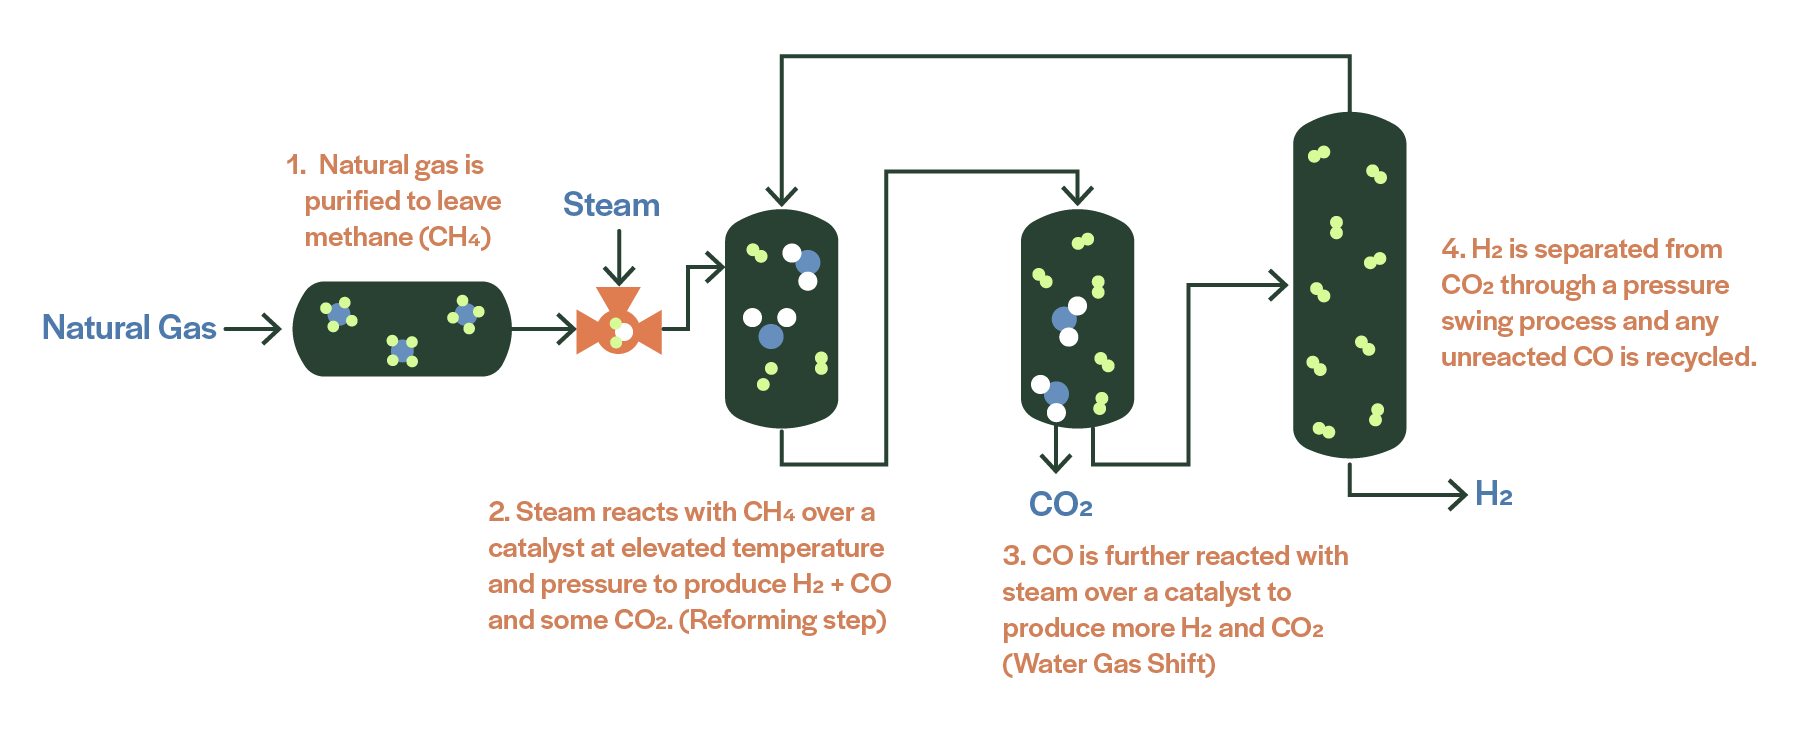 Image reads: 1. Natural gas is purified to leave methane (CH4), 2. Steam reacts with CH4 over a catalyst at elevated temperature and pressure to produce H2 + CO and some CO2. (Reforming step), 3. CO is further reacted with steam over a catalyst to produce more H2 and CO2 (Water Gas Shift), 4. H2 is separated from CO2 through a pressure swing process and any unreacted CO is recycled.